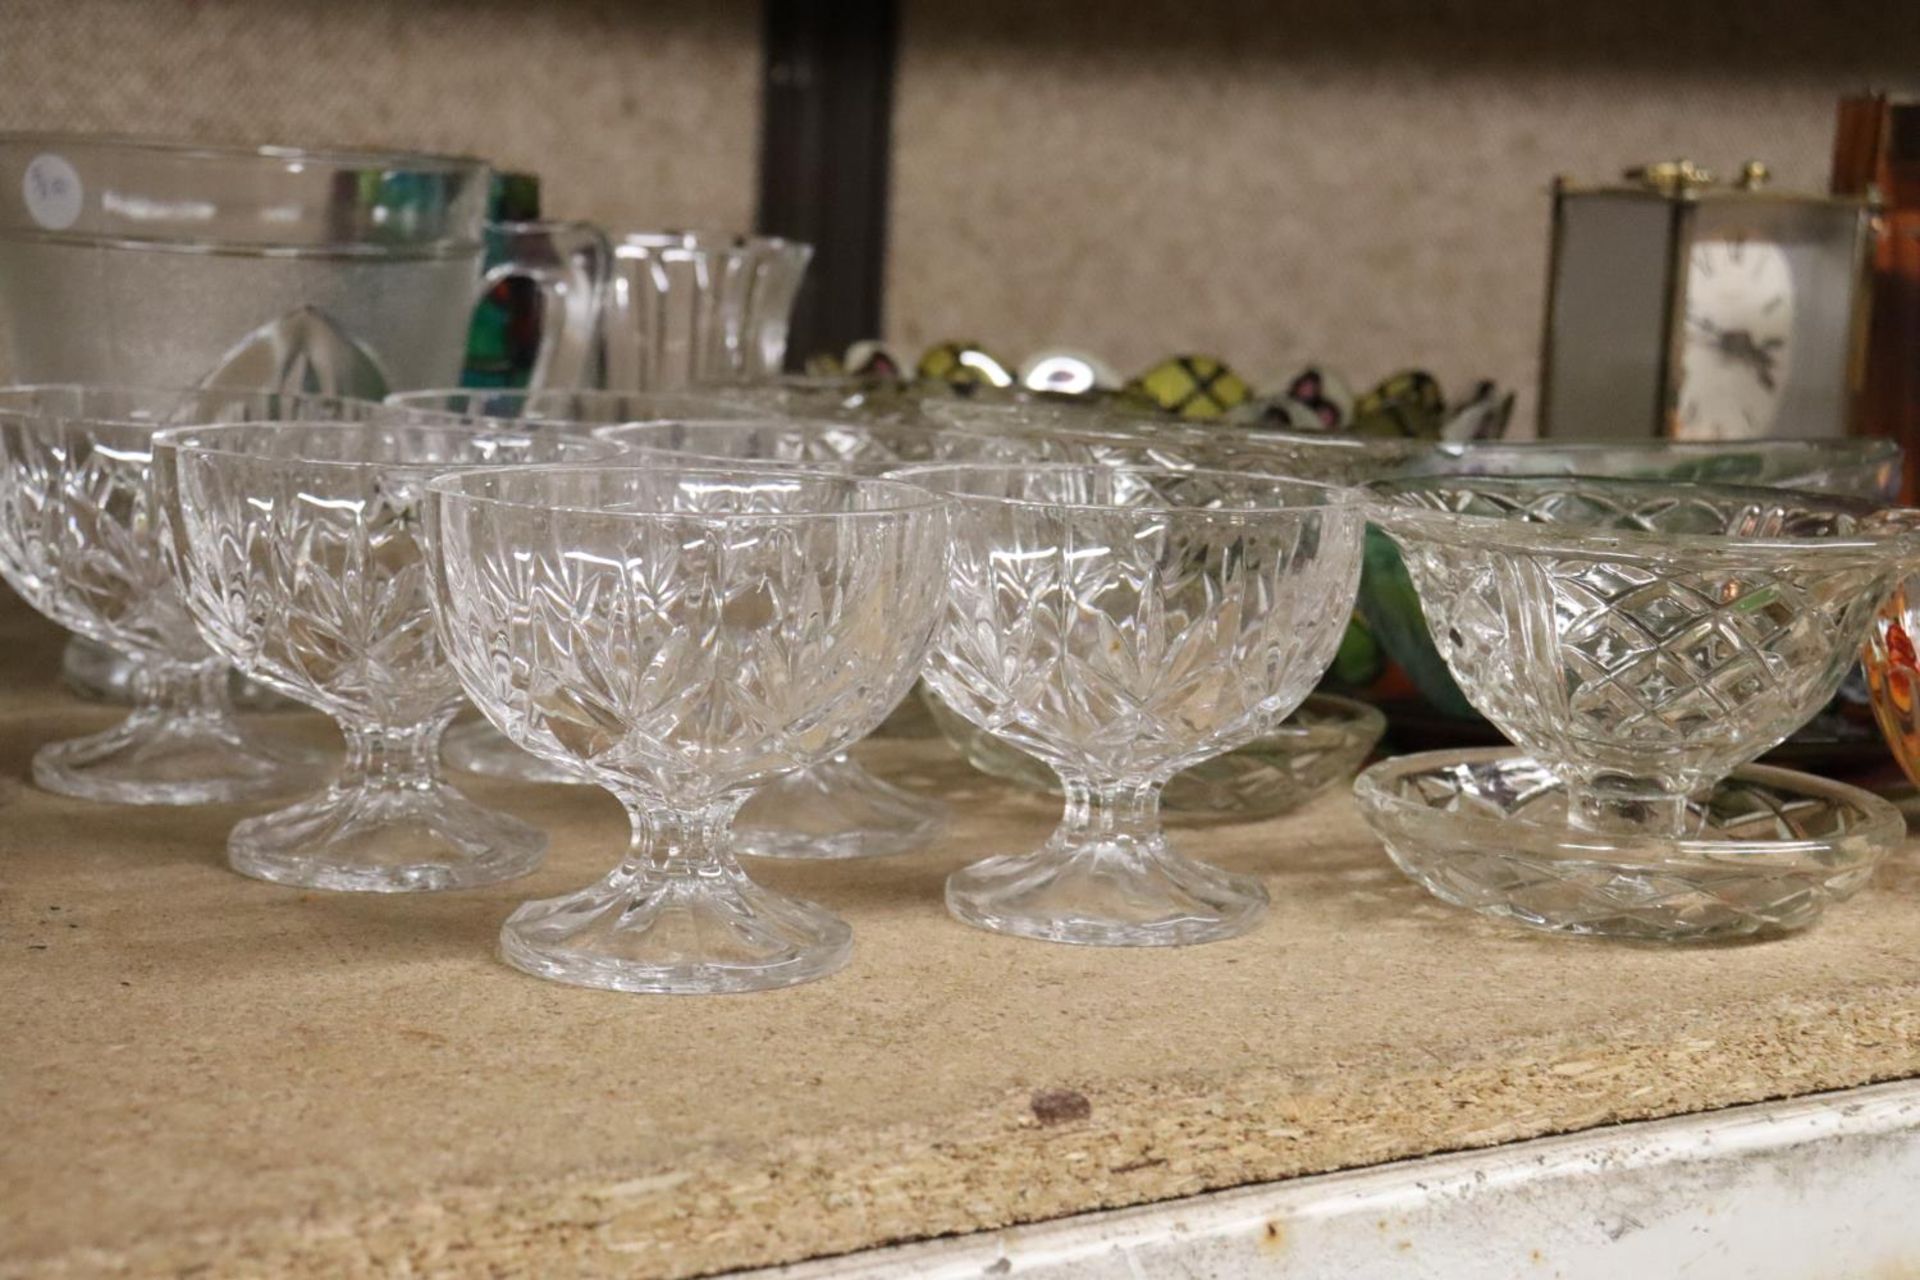 A QUANTITY OF GLASSWARE TO INCLUDE A LARGE COLOURED BOWL, DESSERT BOWLS, A JUG, ETC - Image 7 of 7